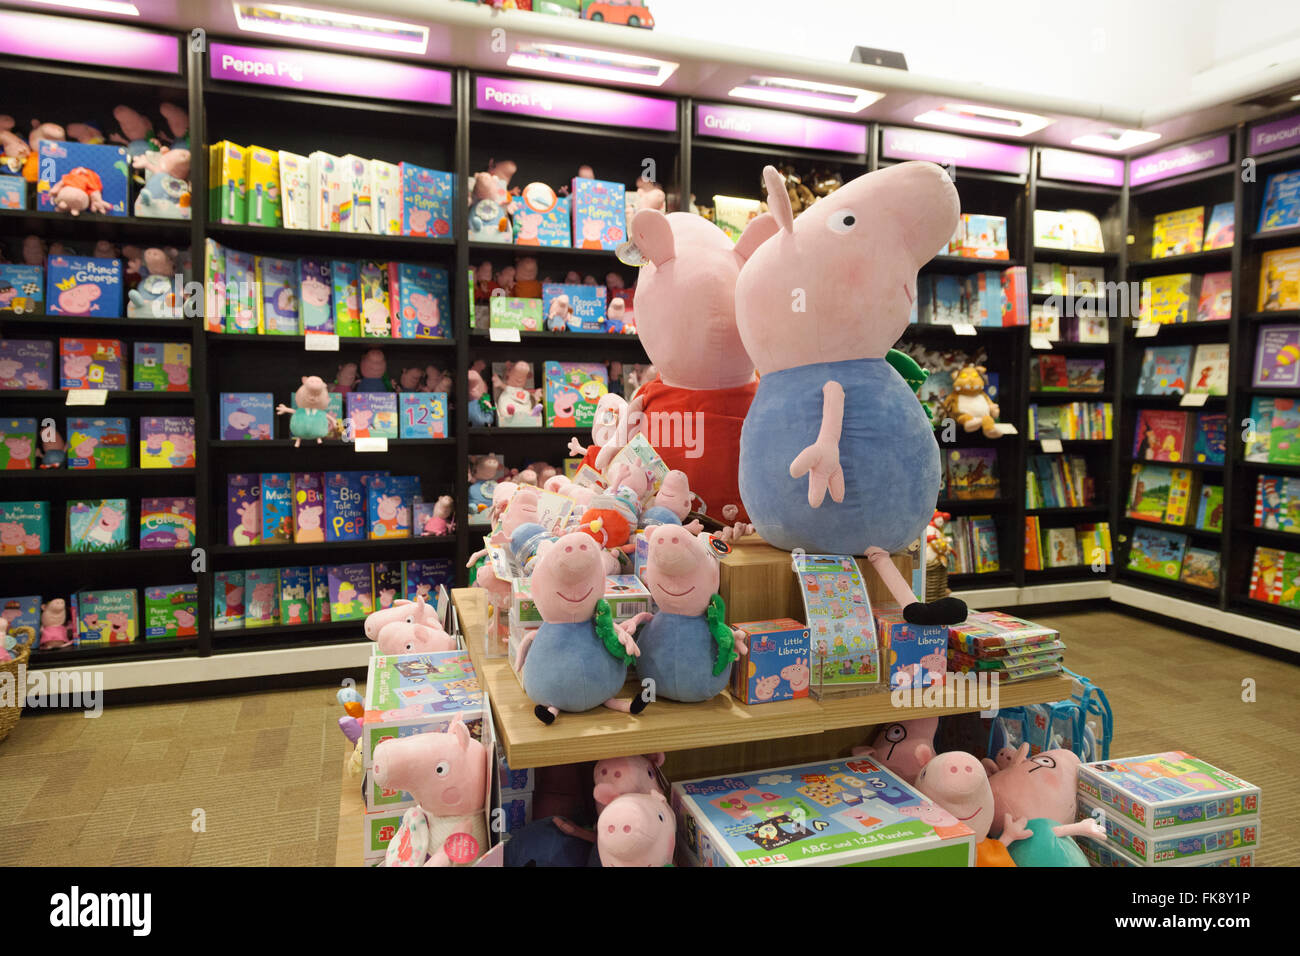 Peppa Pig books display, Waterstones bookstore, Piccadilly, London UK Stock Photo